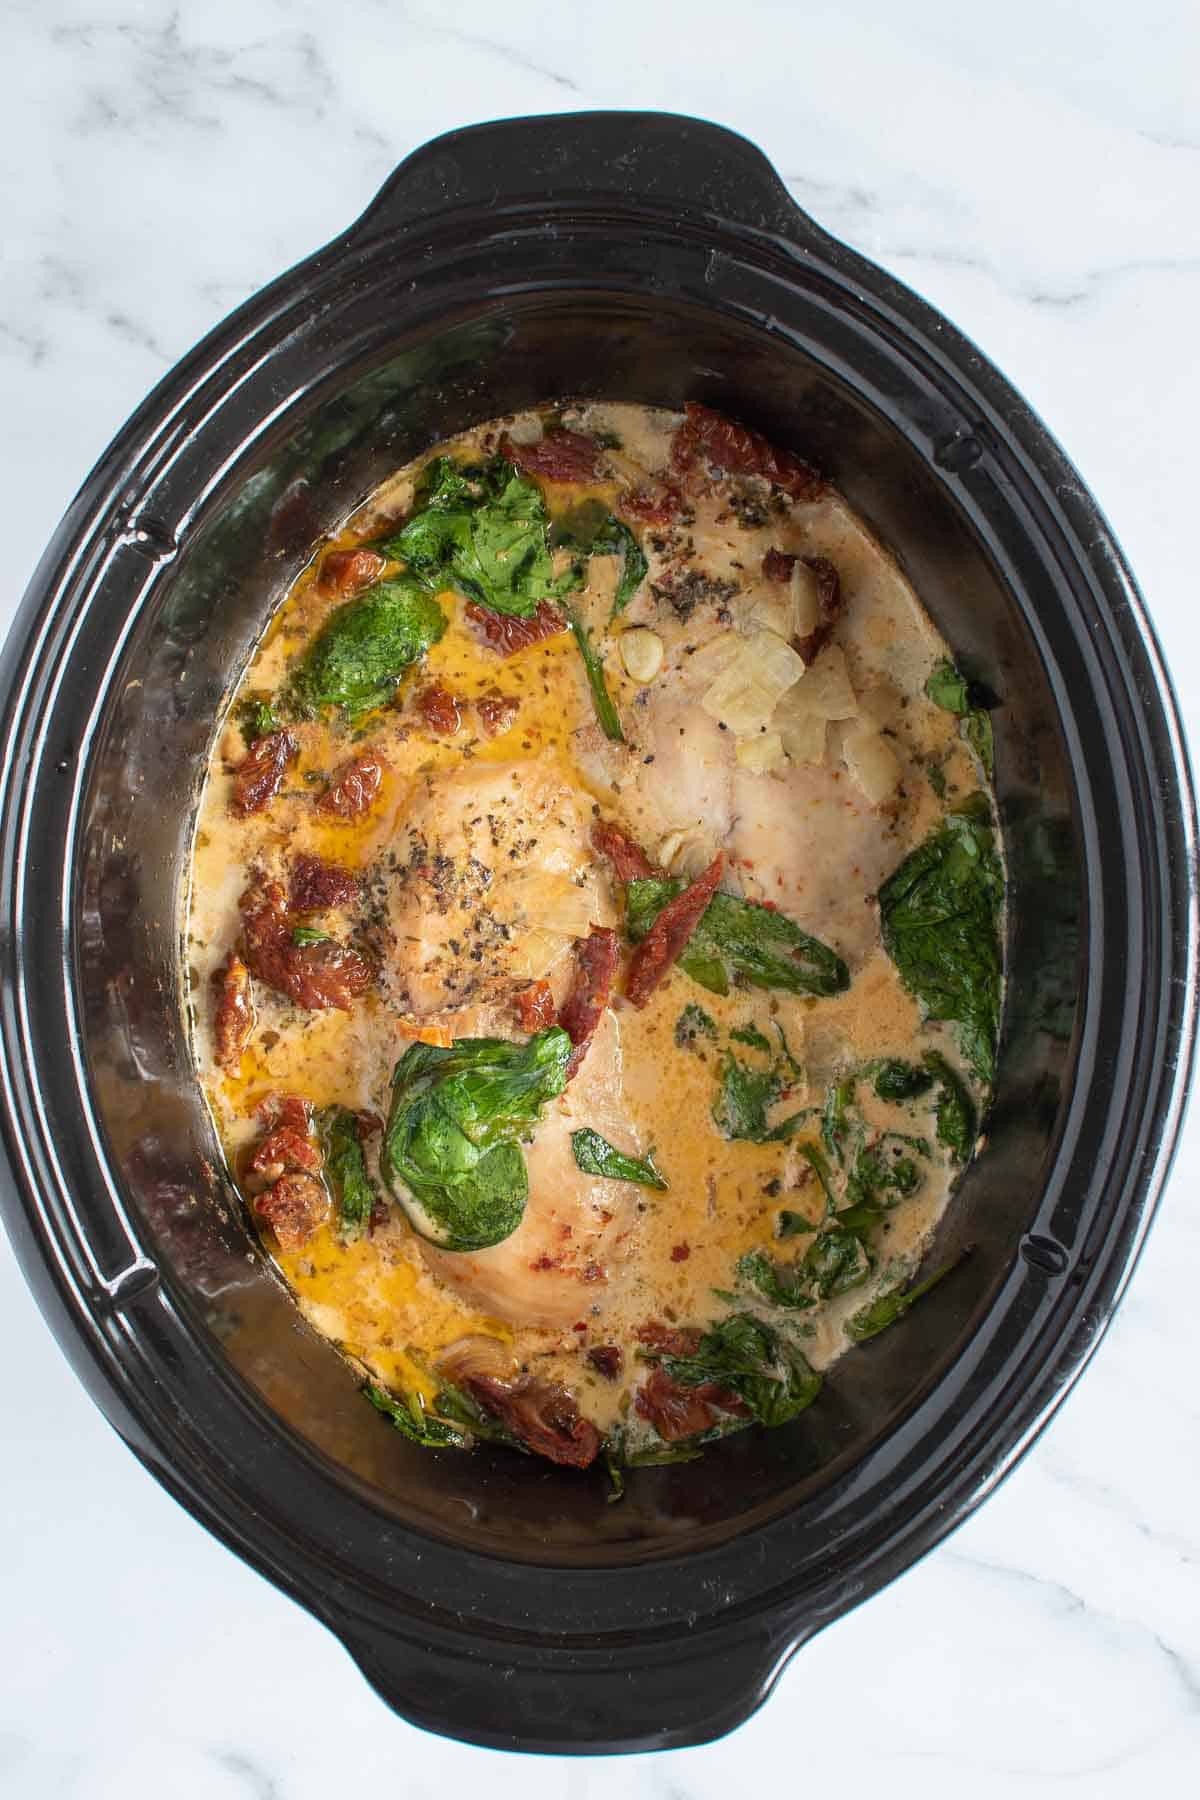 A Crockpot with chicken, cream, spinach and sun dried tomatoes.